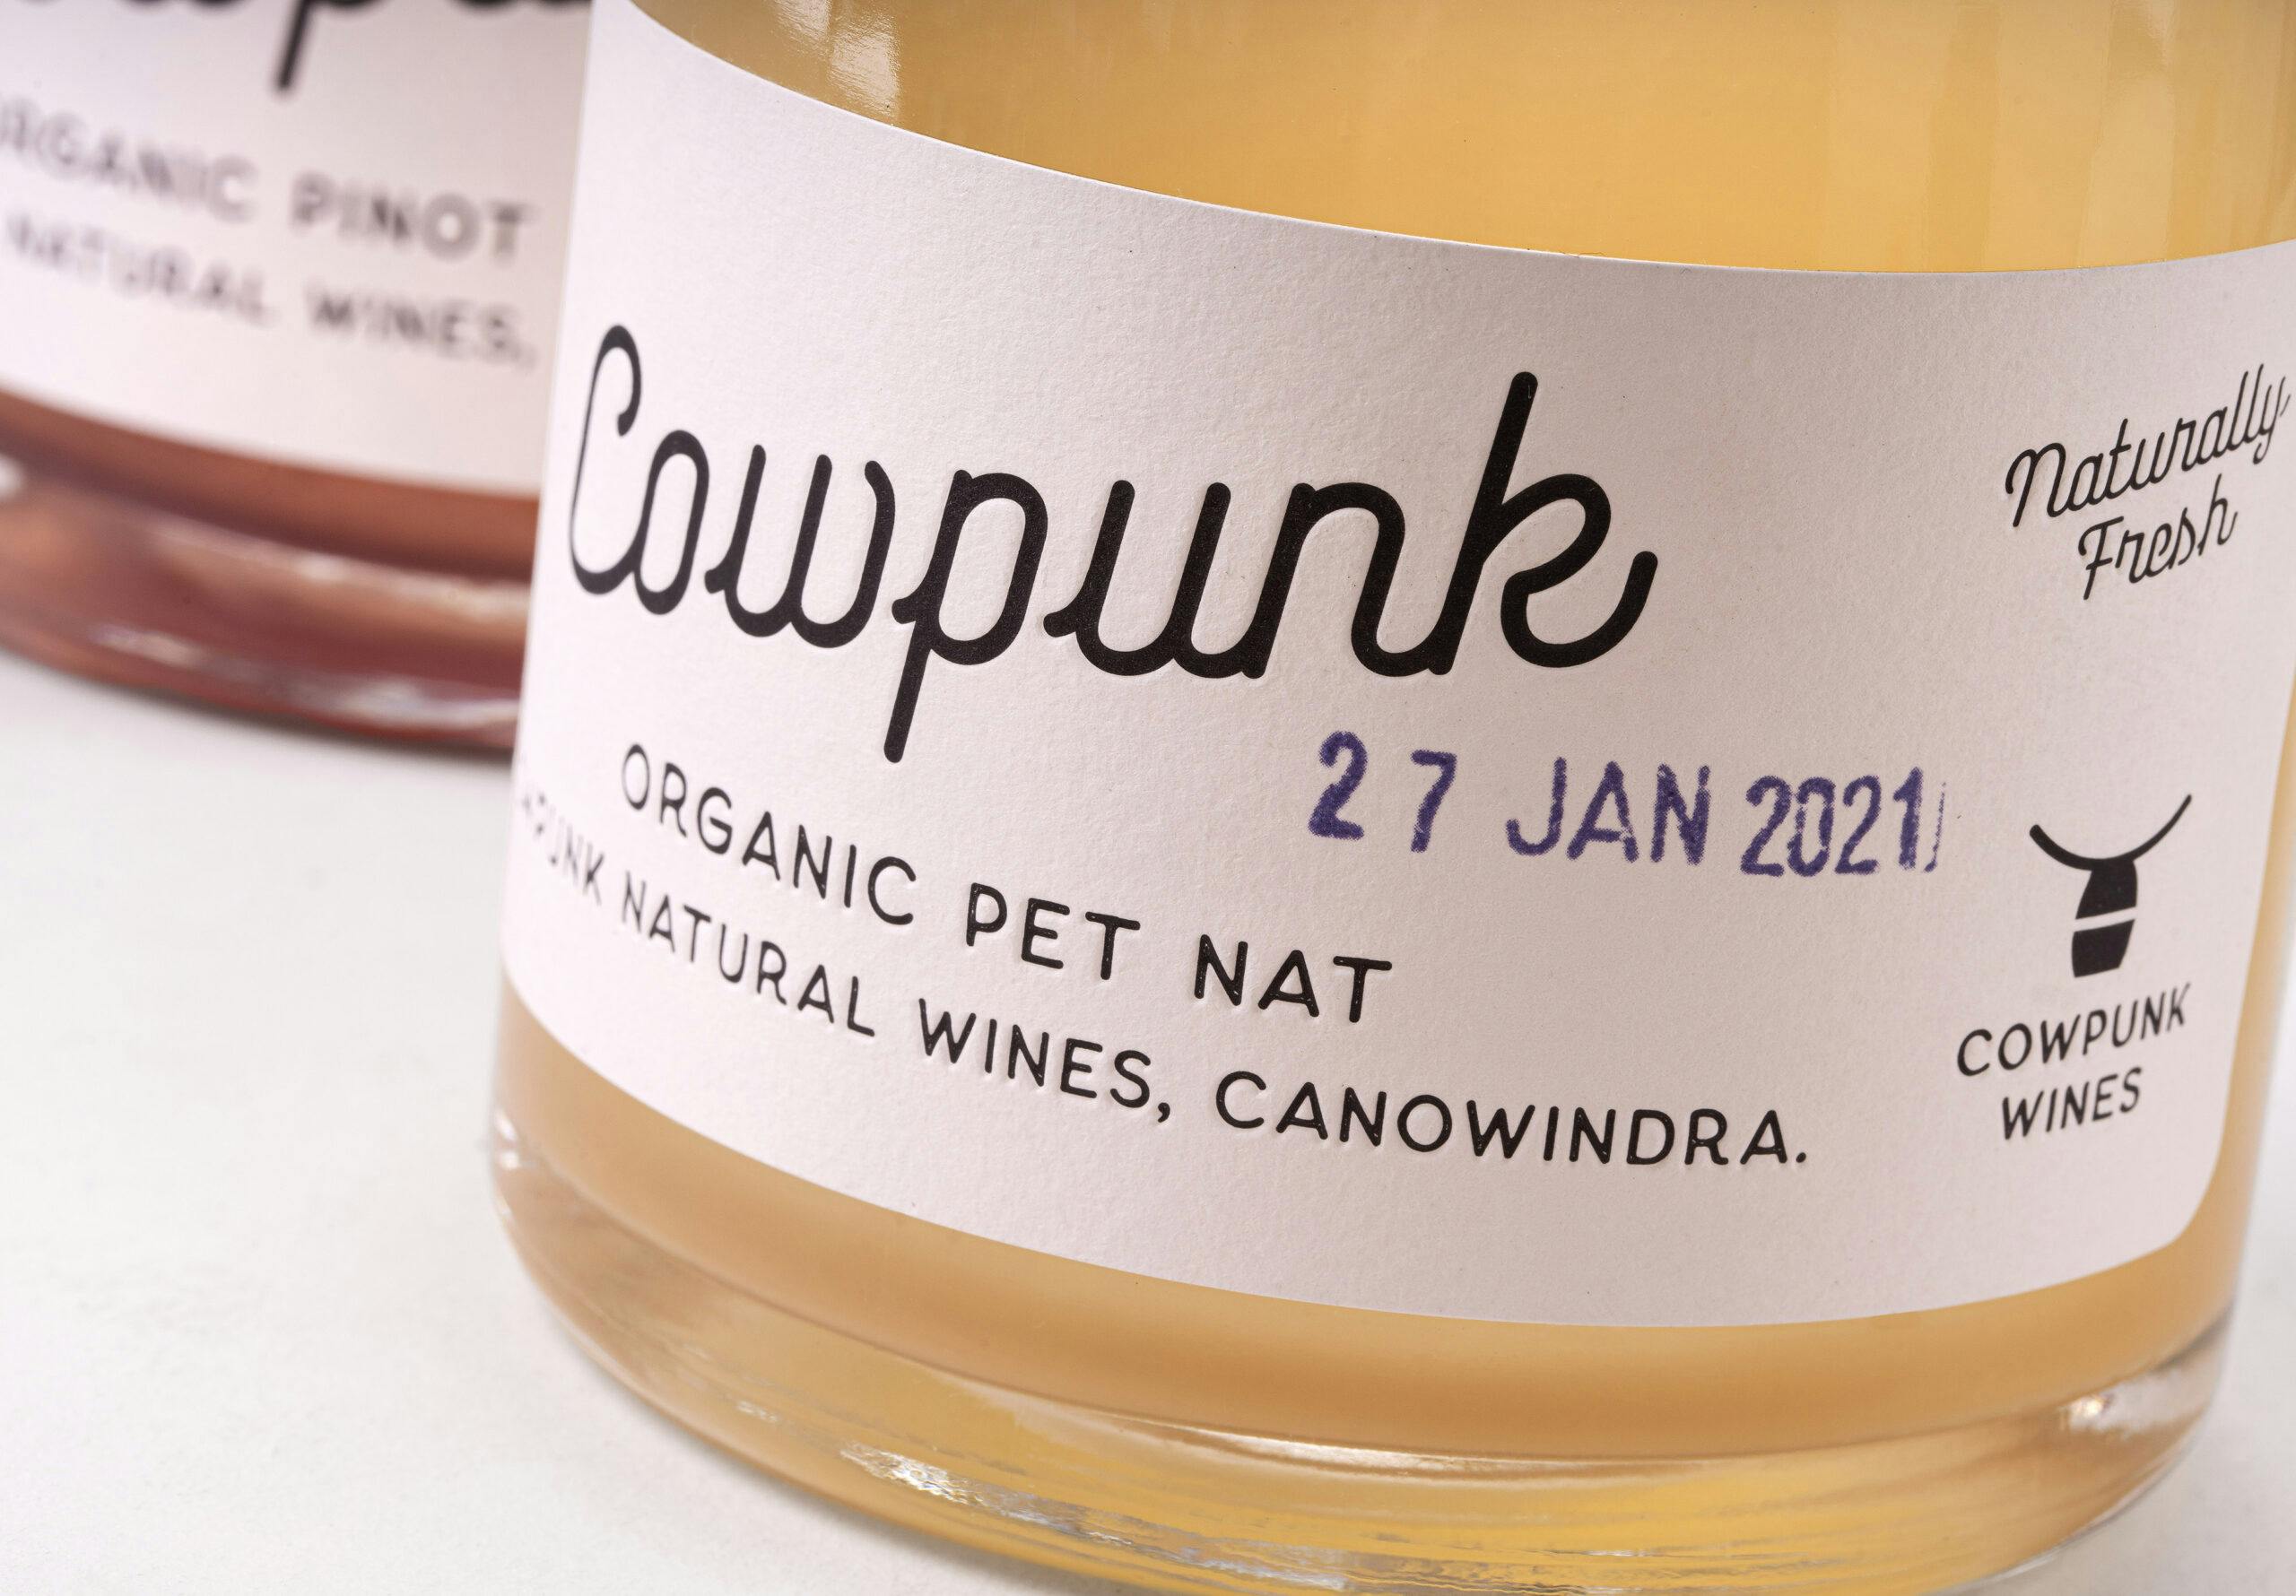 Image of Cowpunk Natural Wines